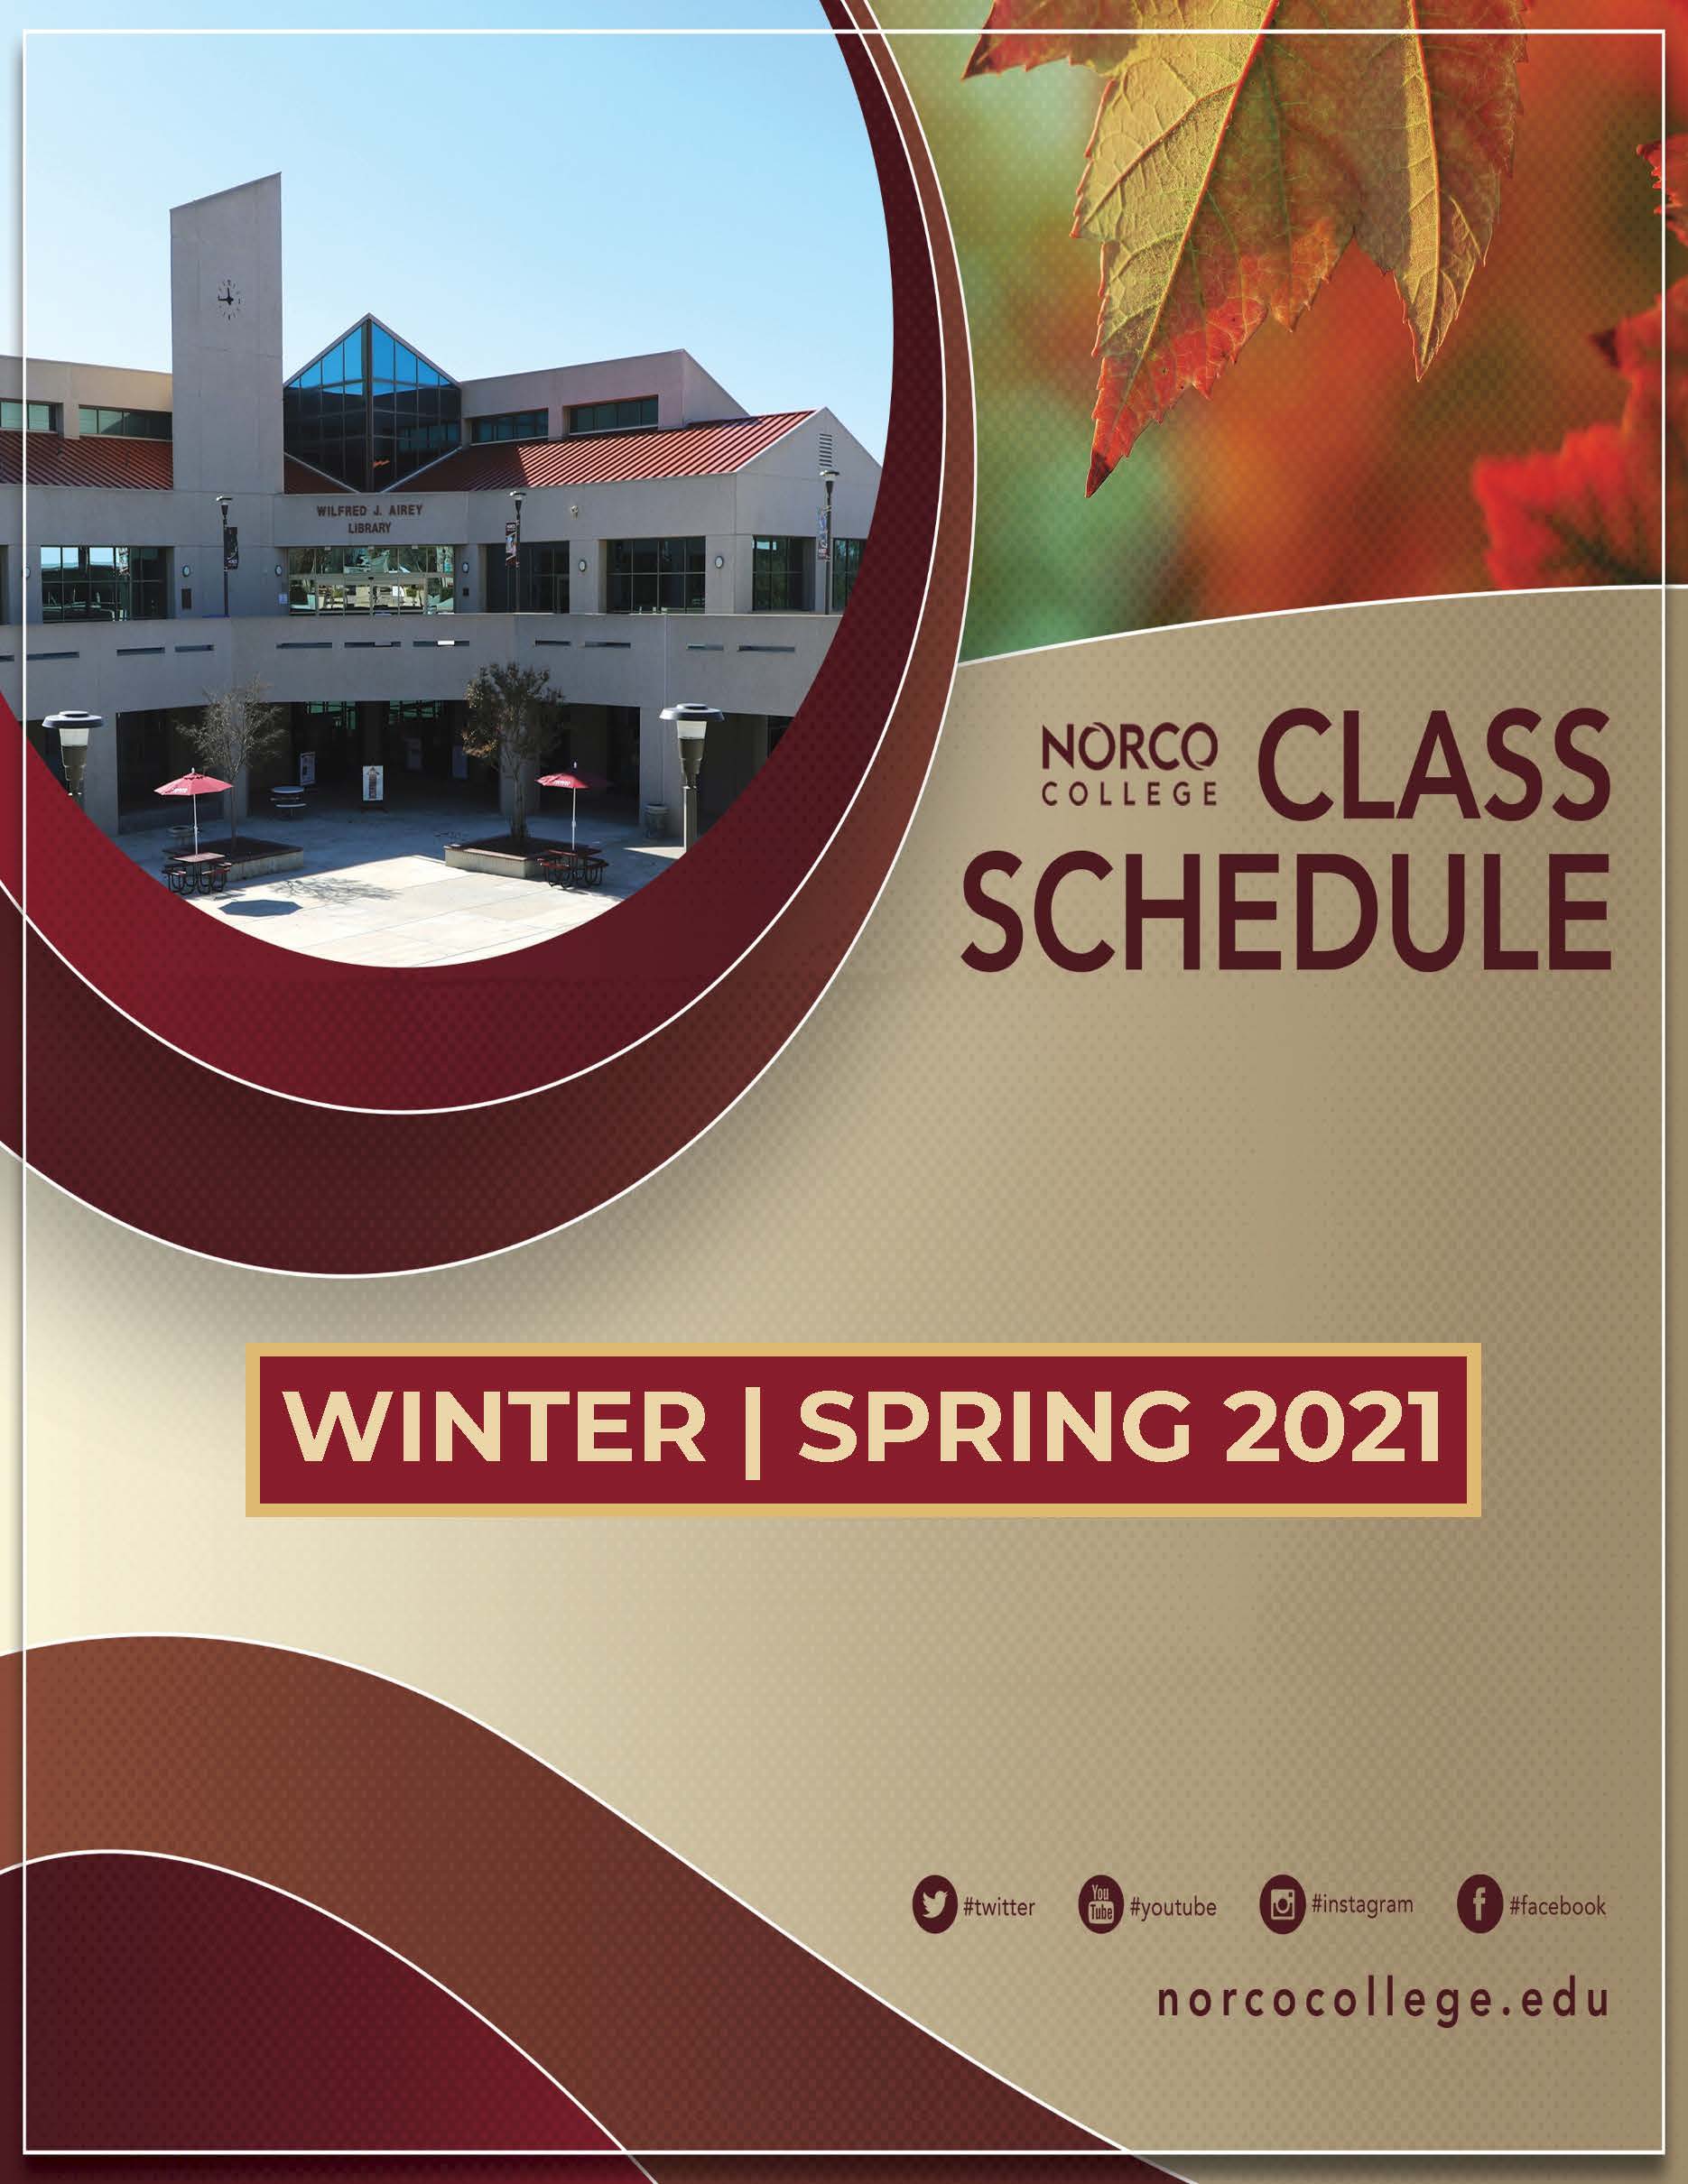 Winter and Spring 2021 schedule of classes